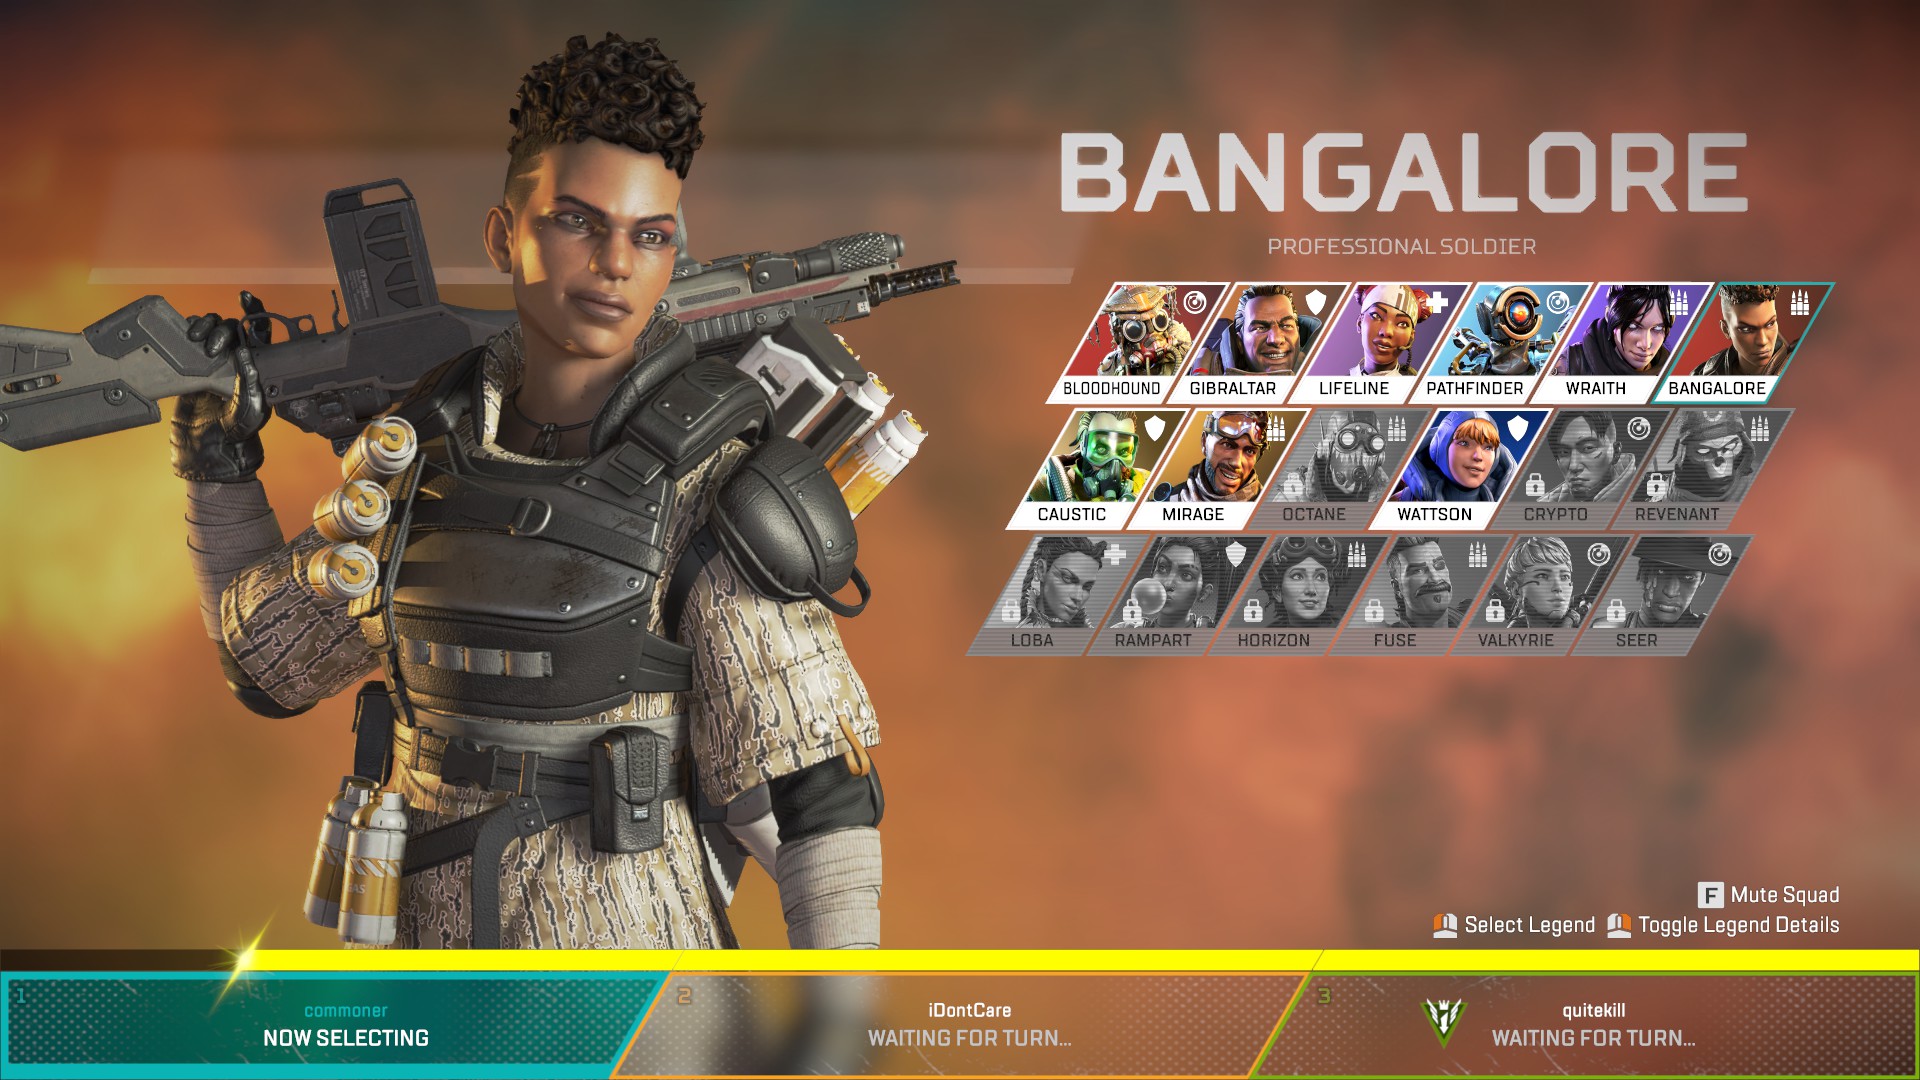 How to Play as Bangalore in Apex Legends (Season 10)